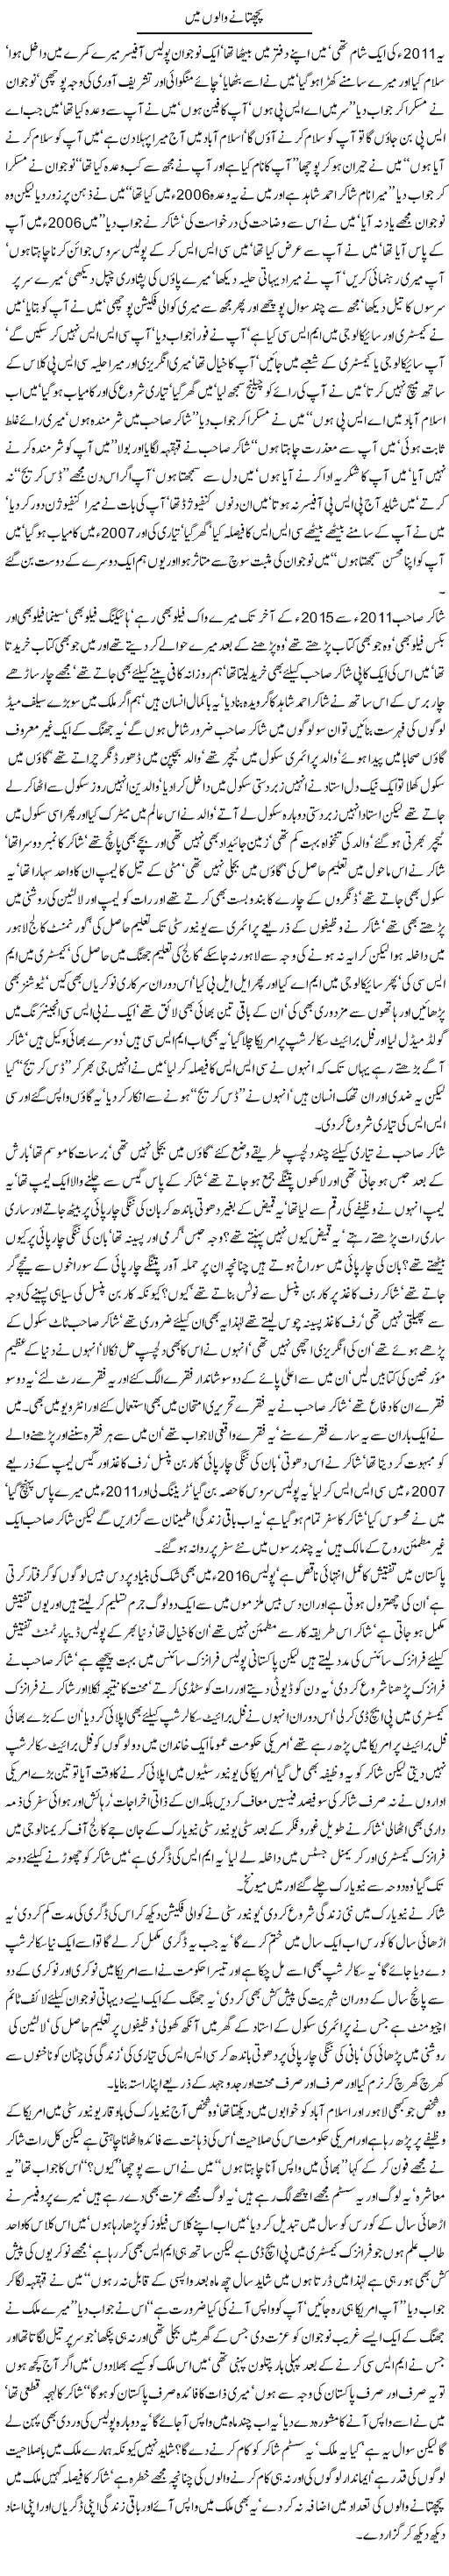 Pachtane walon mian se by Javed Chaudhry